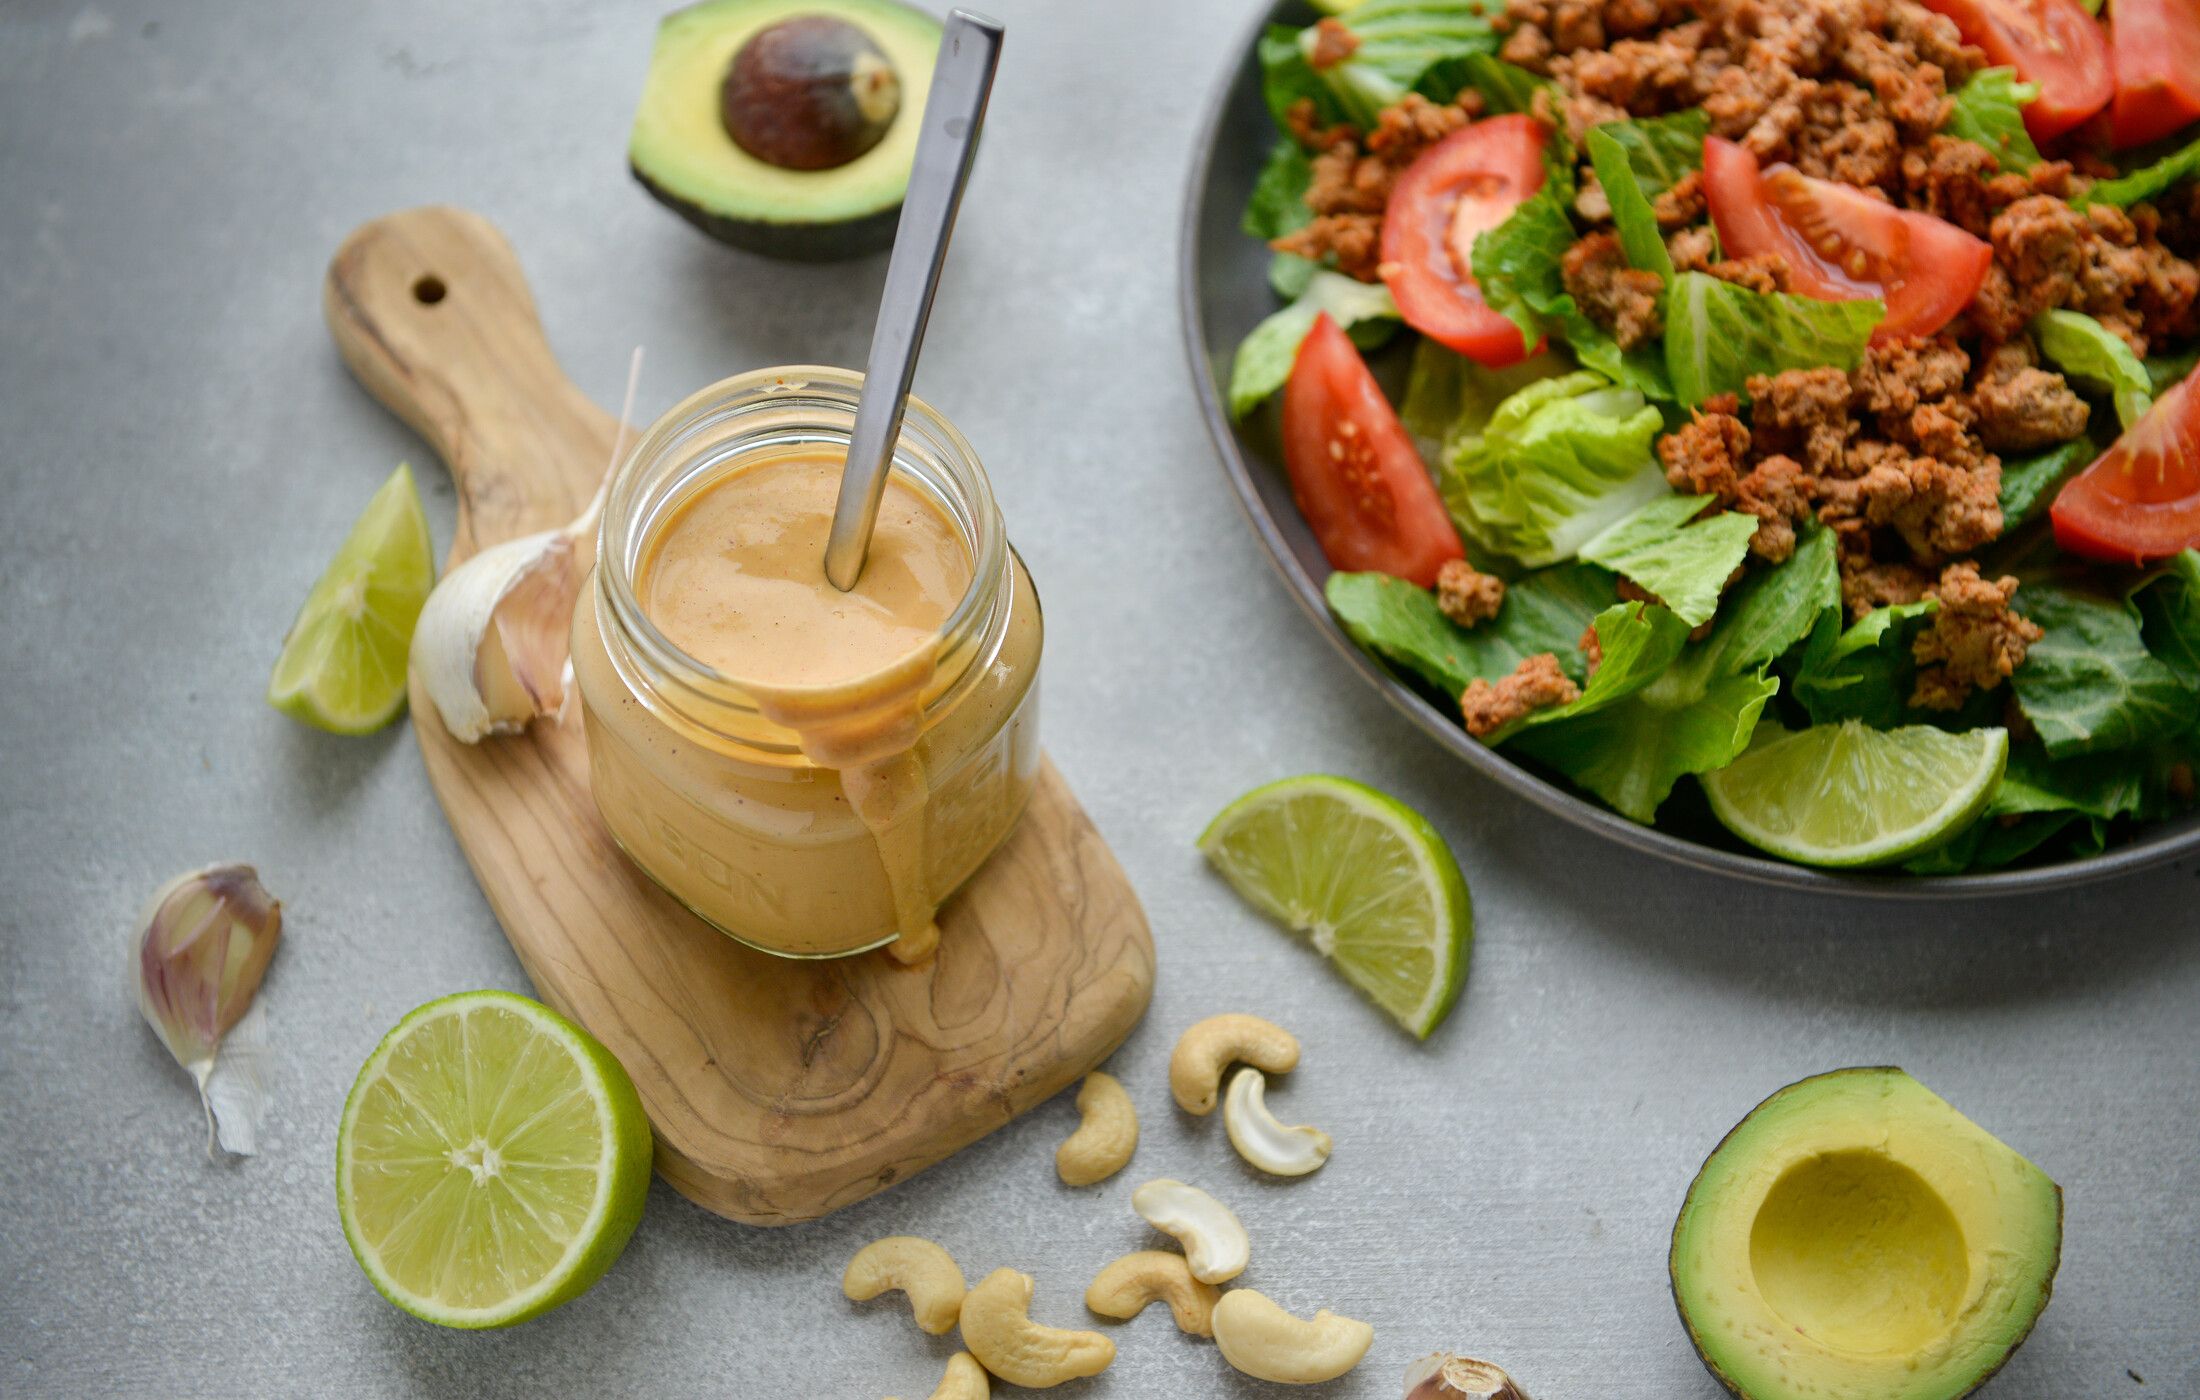 Creamy Chipotle-Lime Dressing